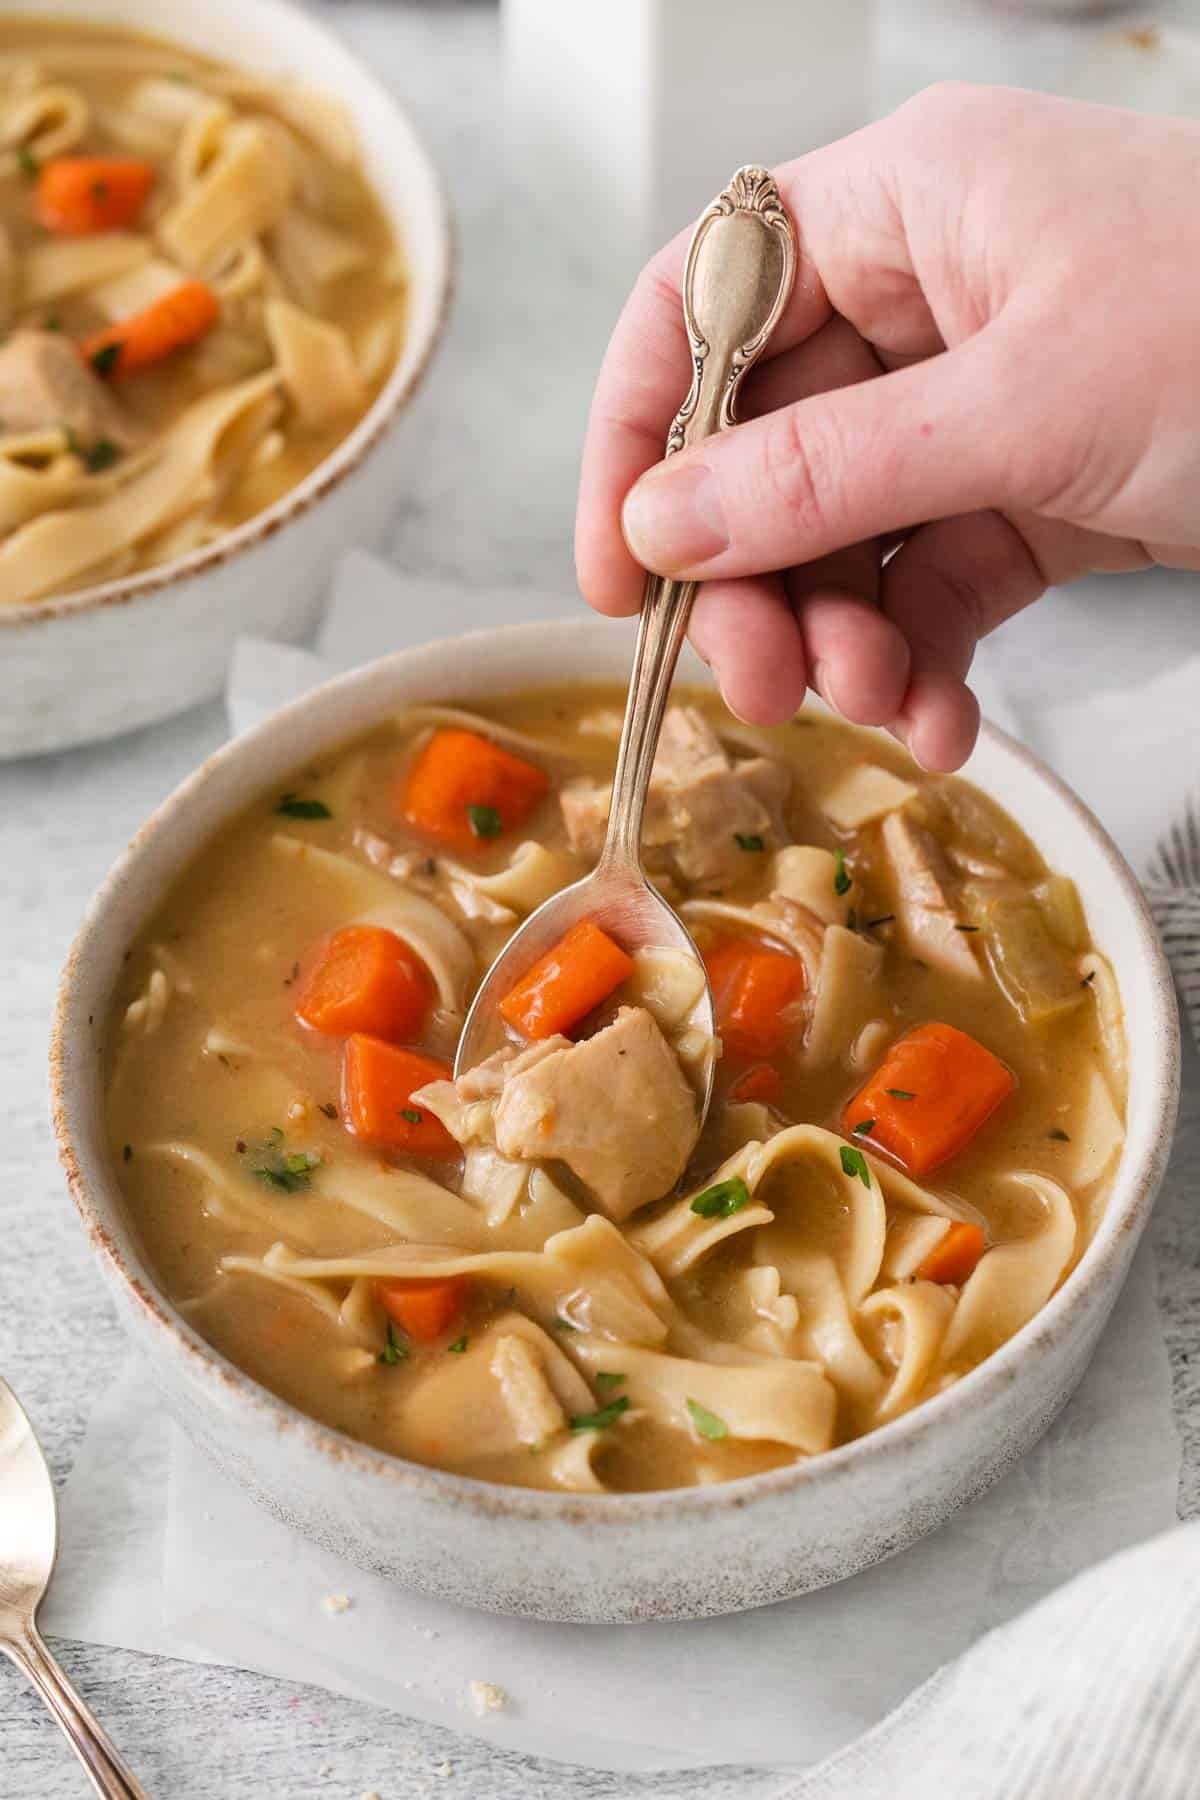 Gluten-free chicken soup in a bowl, and a hand spooning the soup out of the bowl